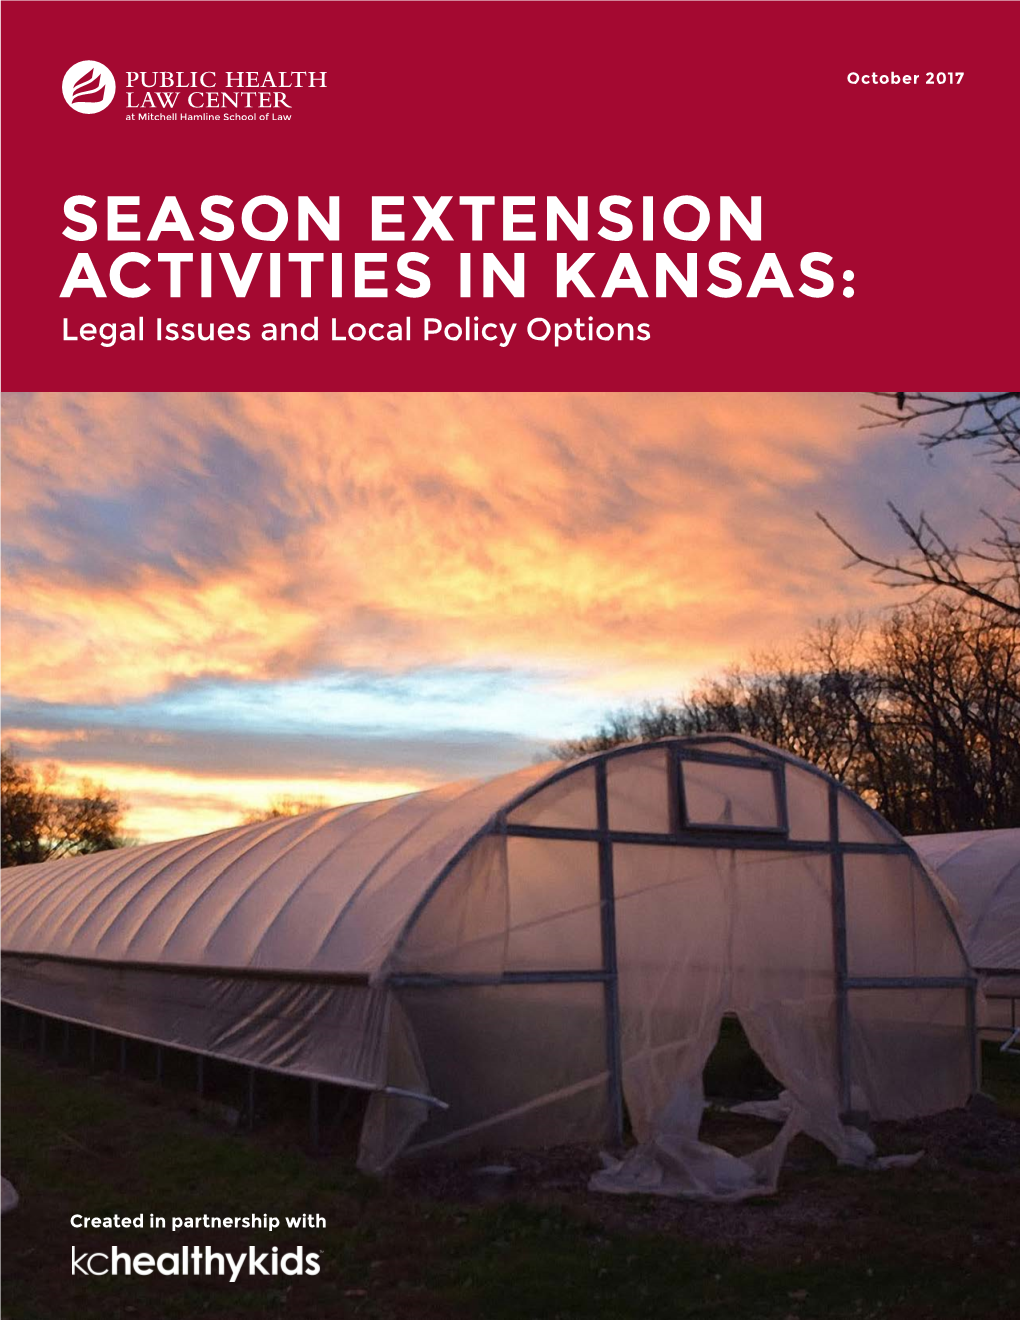 SEASON EXTENSION ACTIVITIES in KANSAS: Legal Issues and Local Policy Options